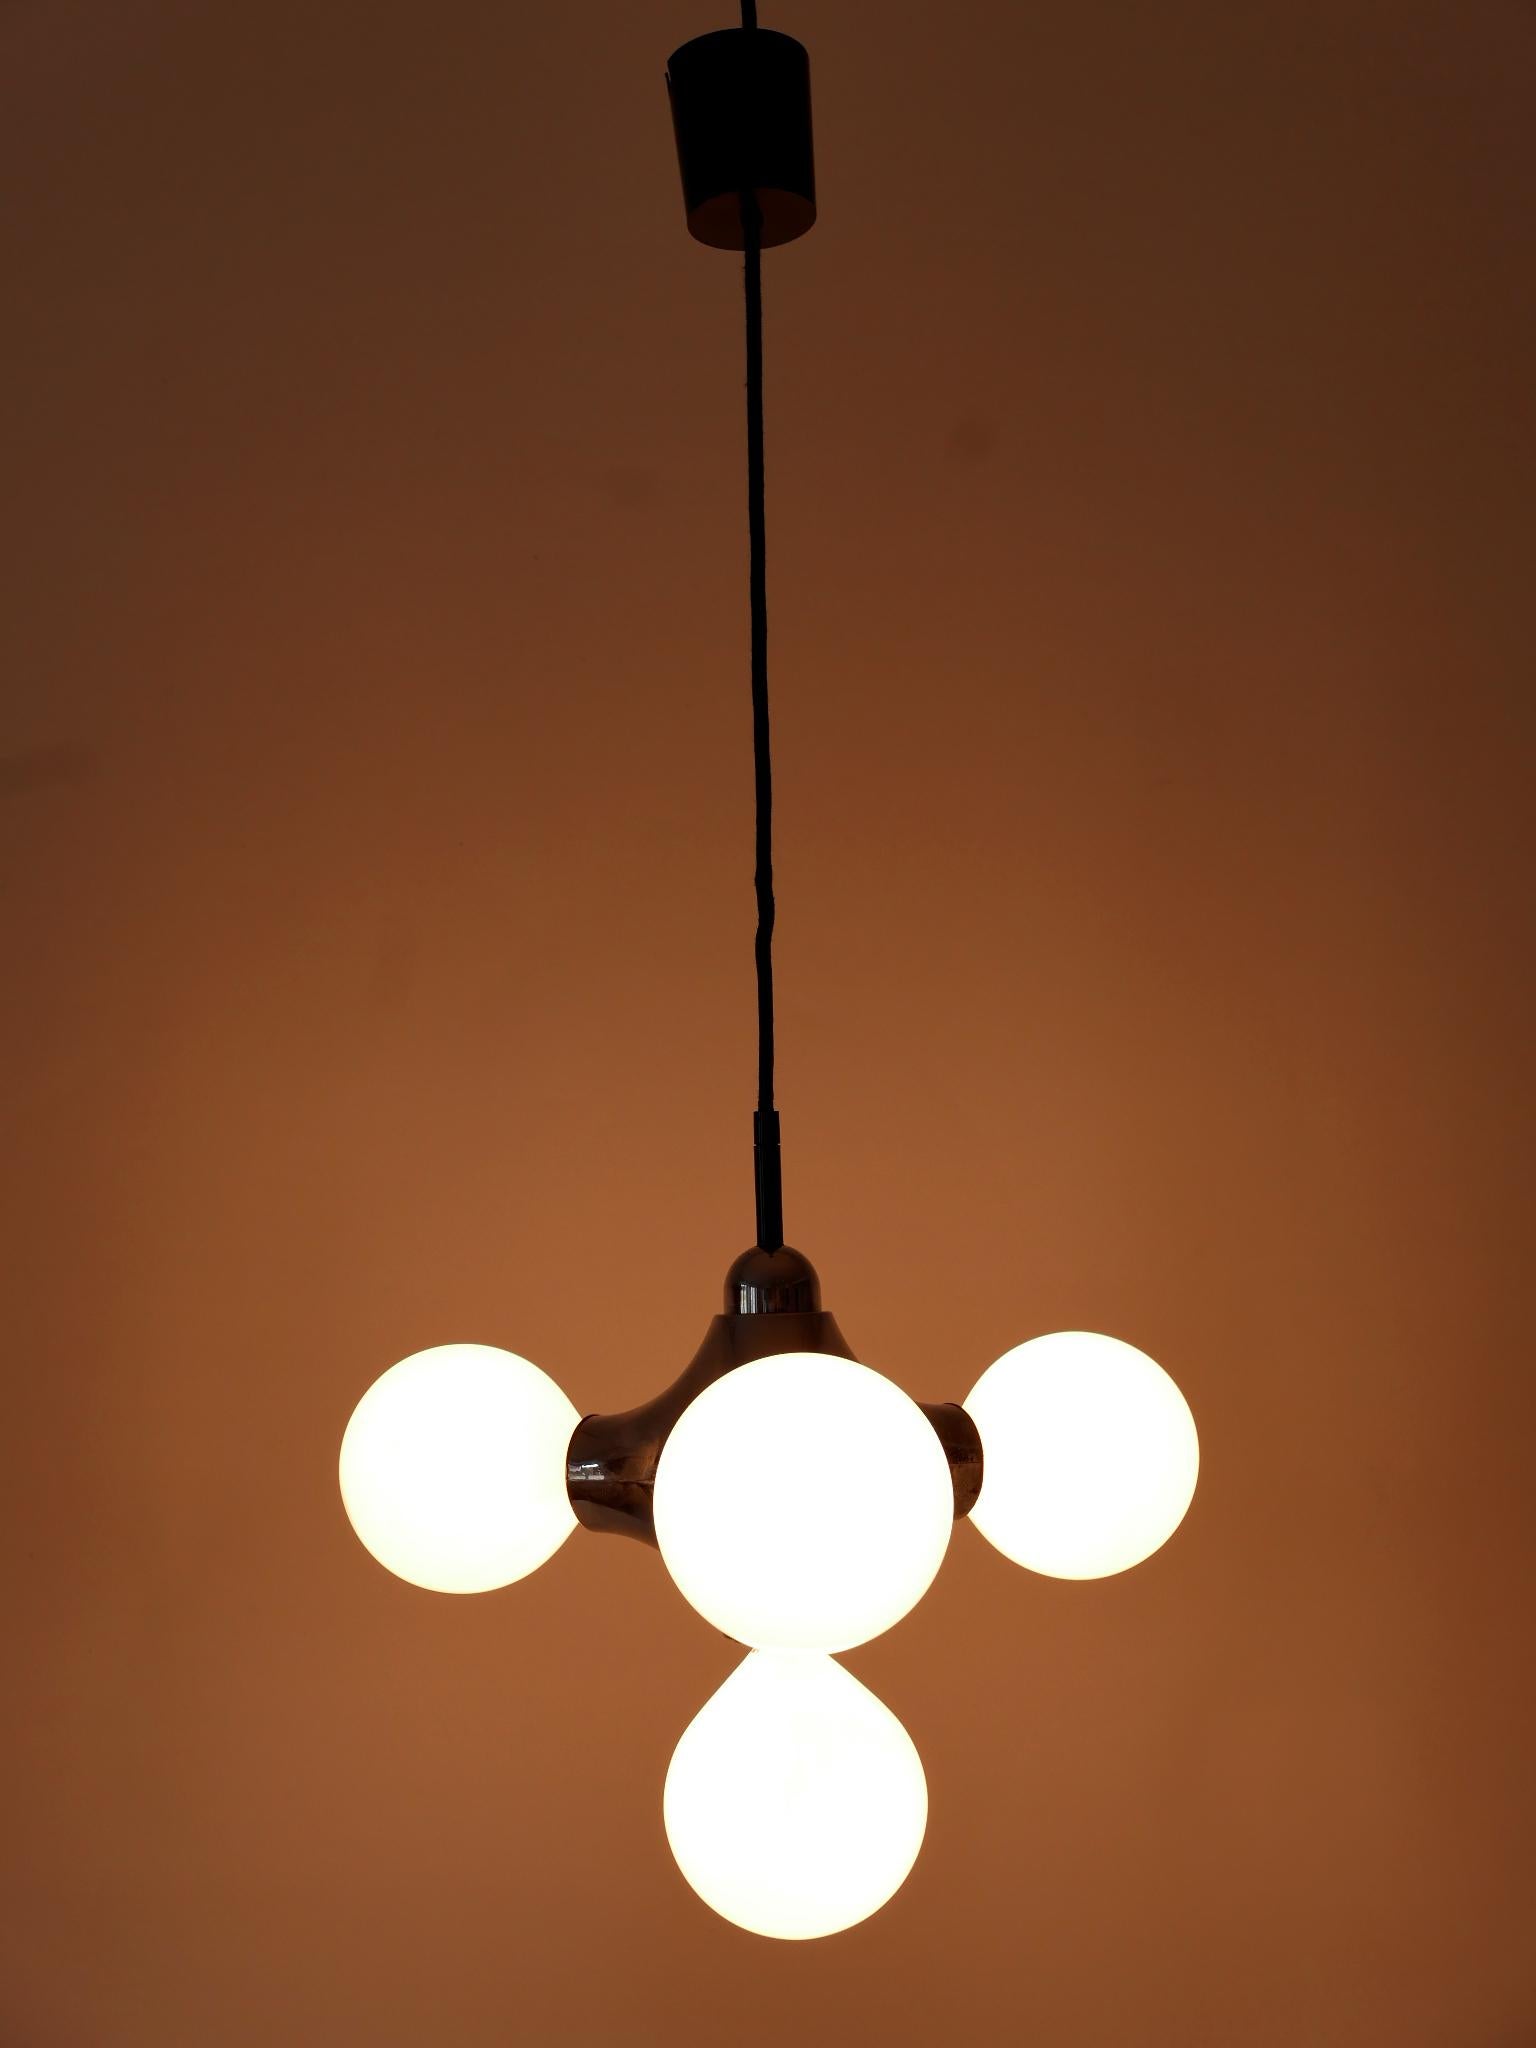 Rare Mid-Century Modern Atomic Pendant Lamp by Gebrüder Cosack Germany 1970s For Sale 4